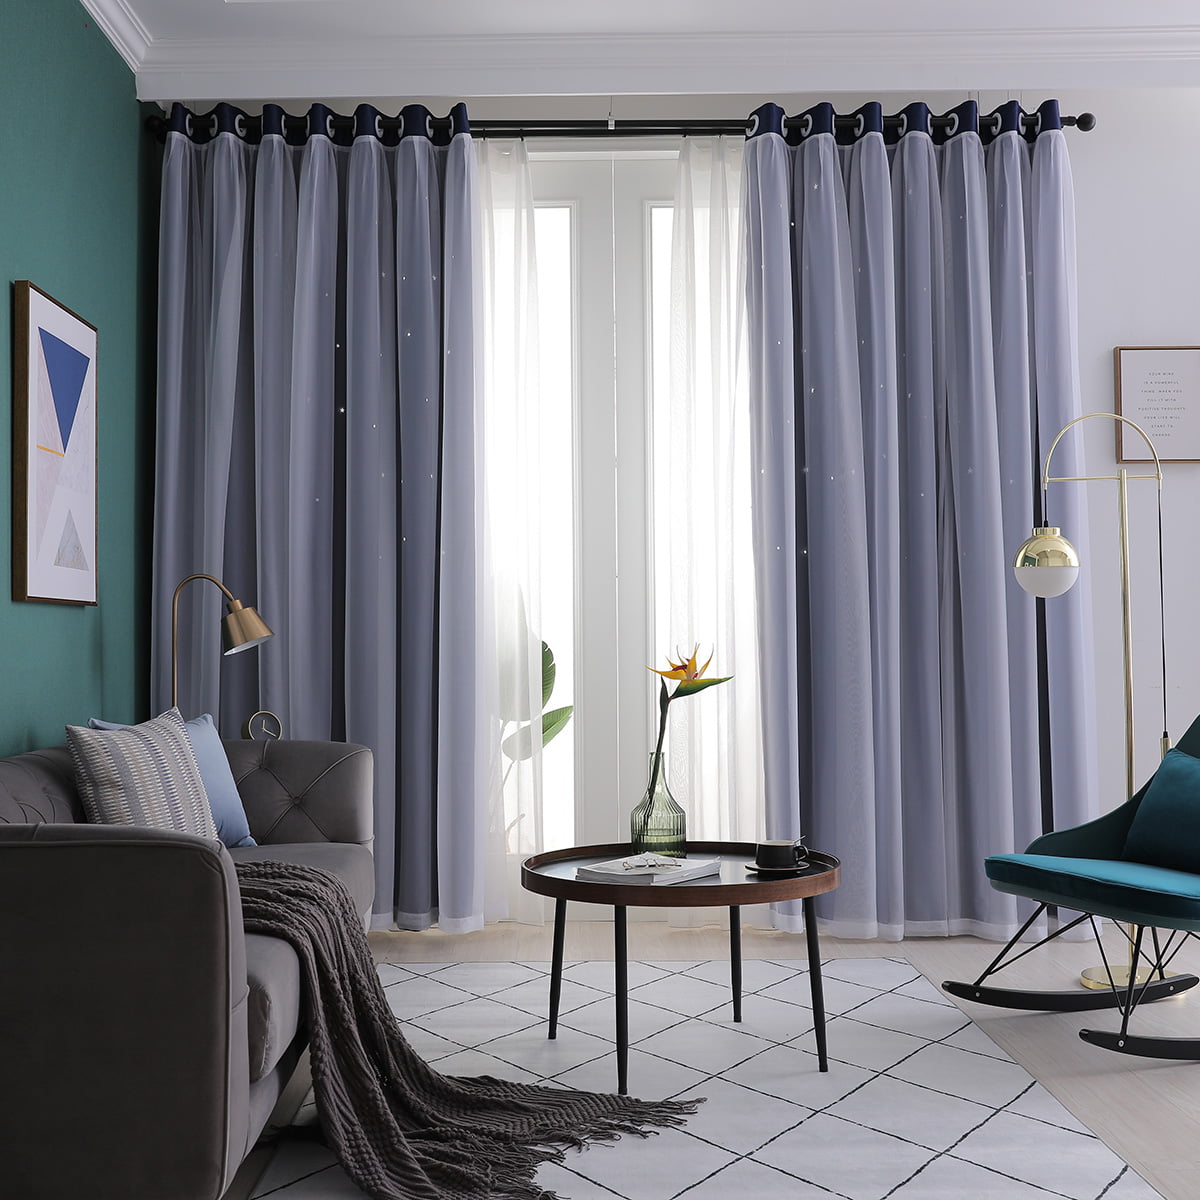 Details about   1/2 Panels Window Curtain Double-Layer Yarn Tulle Hollow-Out Drapes Home Decor 